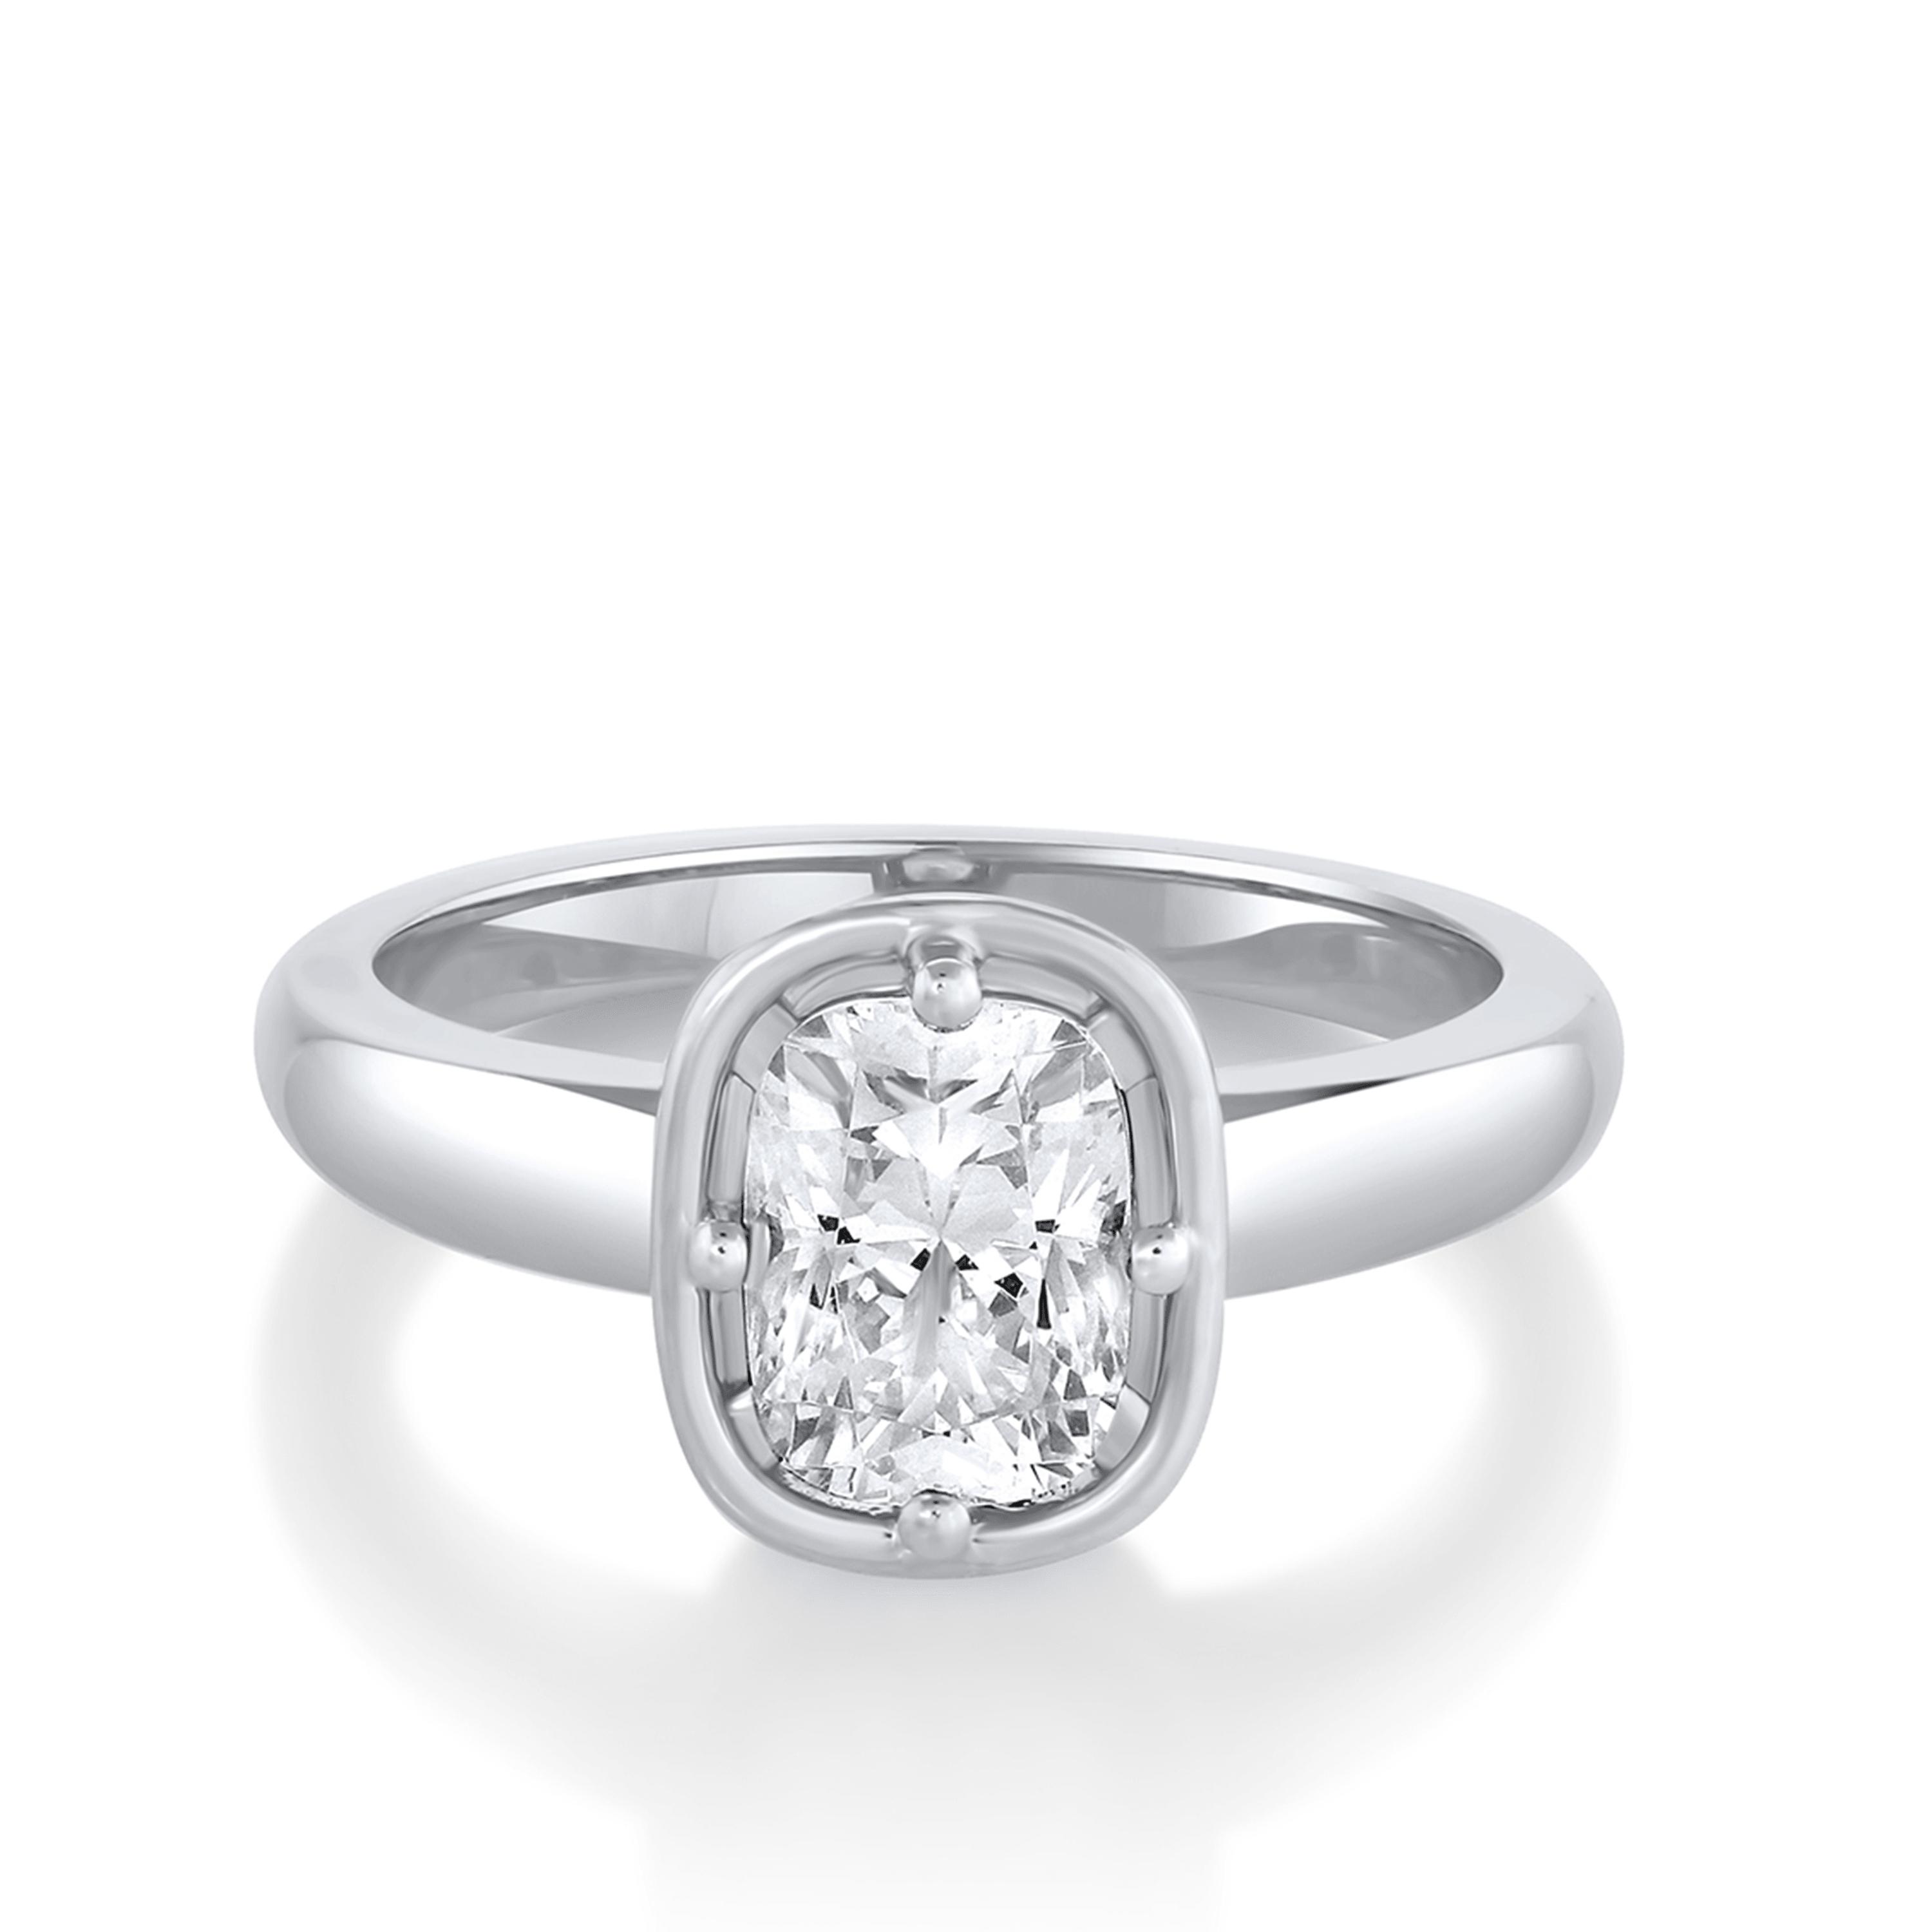 Marrow Fine Jewelry Vintage-Inspired White Diamond Engagement Ring